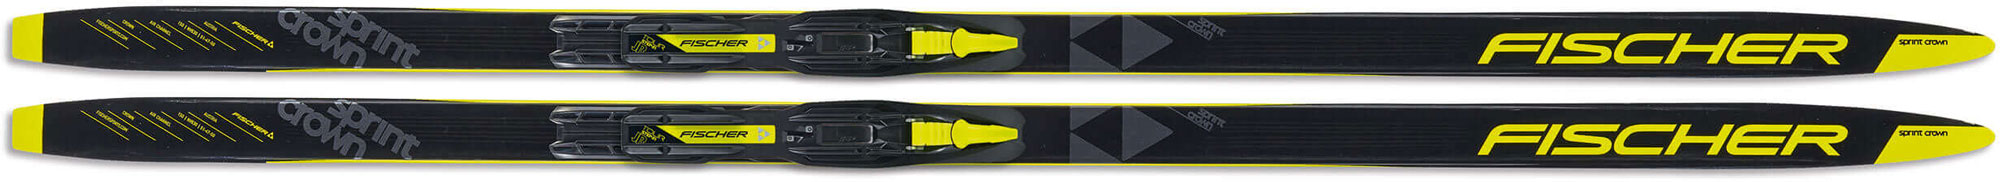 Children’s classic style nordic skis with uphill travel support.